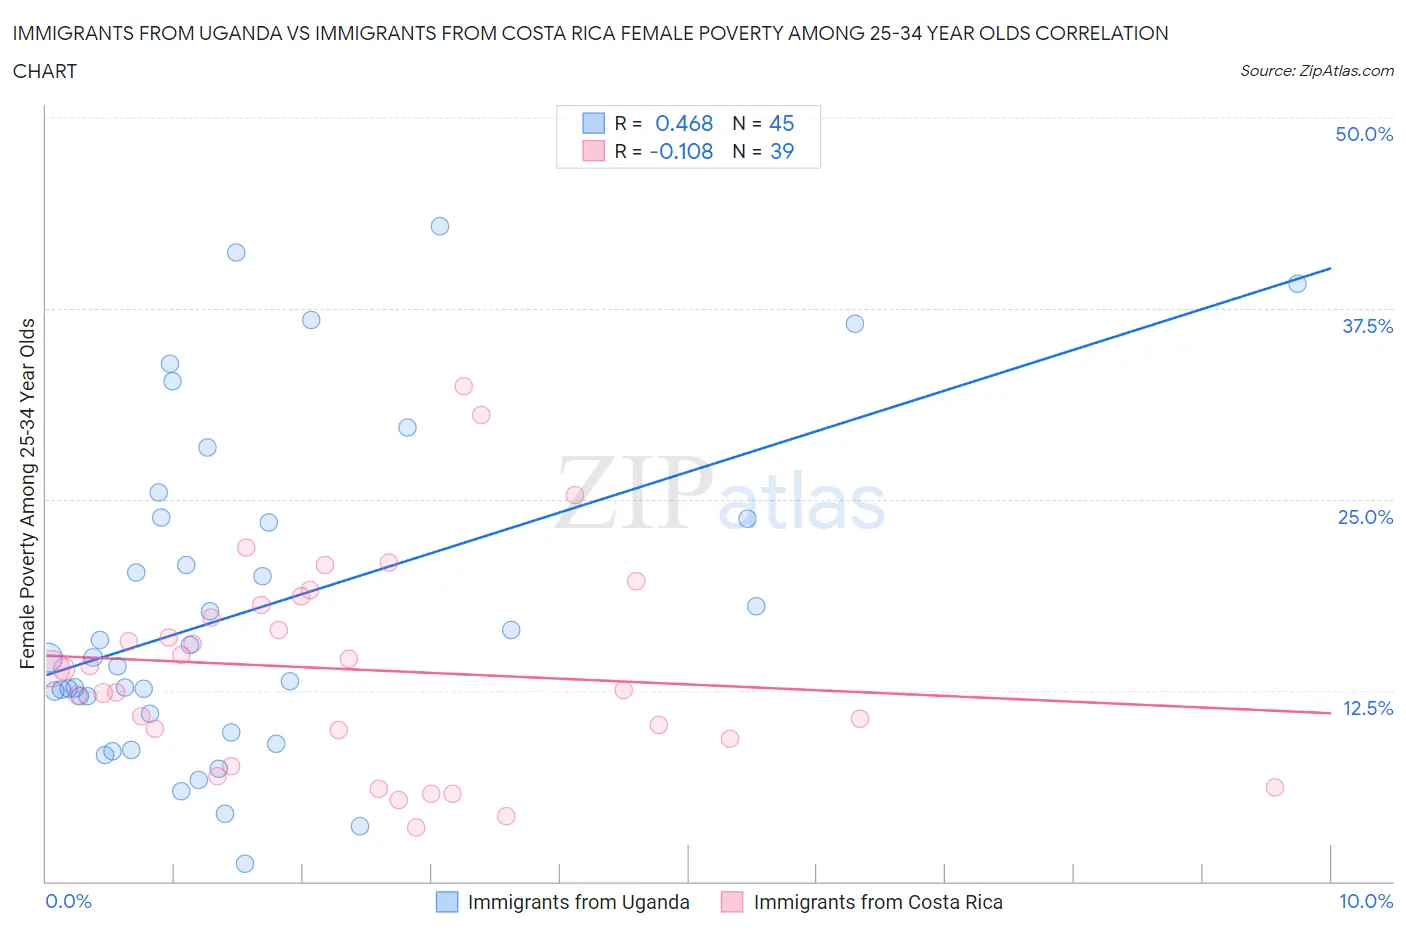 Immigrants from Uganda vs Immigrants from Costa Rica Female Poverty Among 25-34 Year Olds